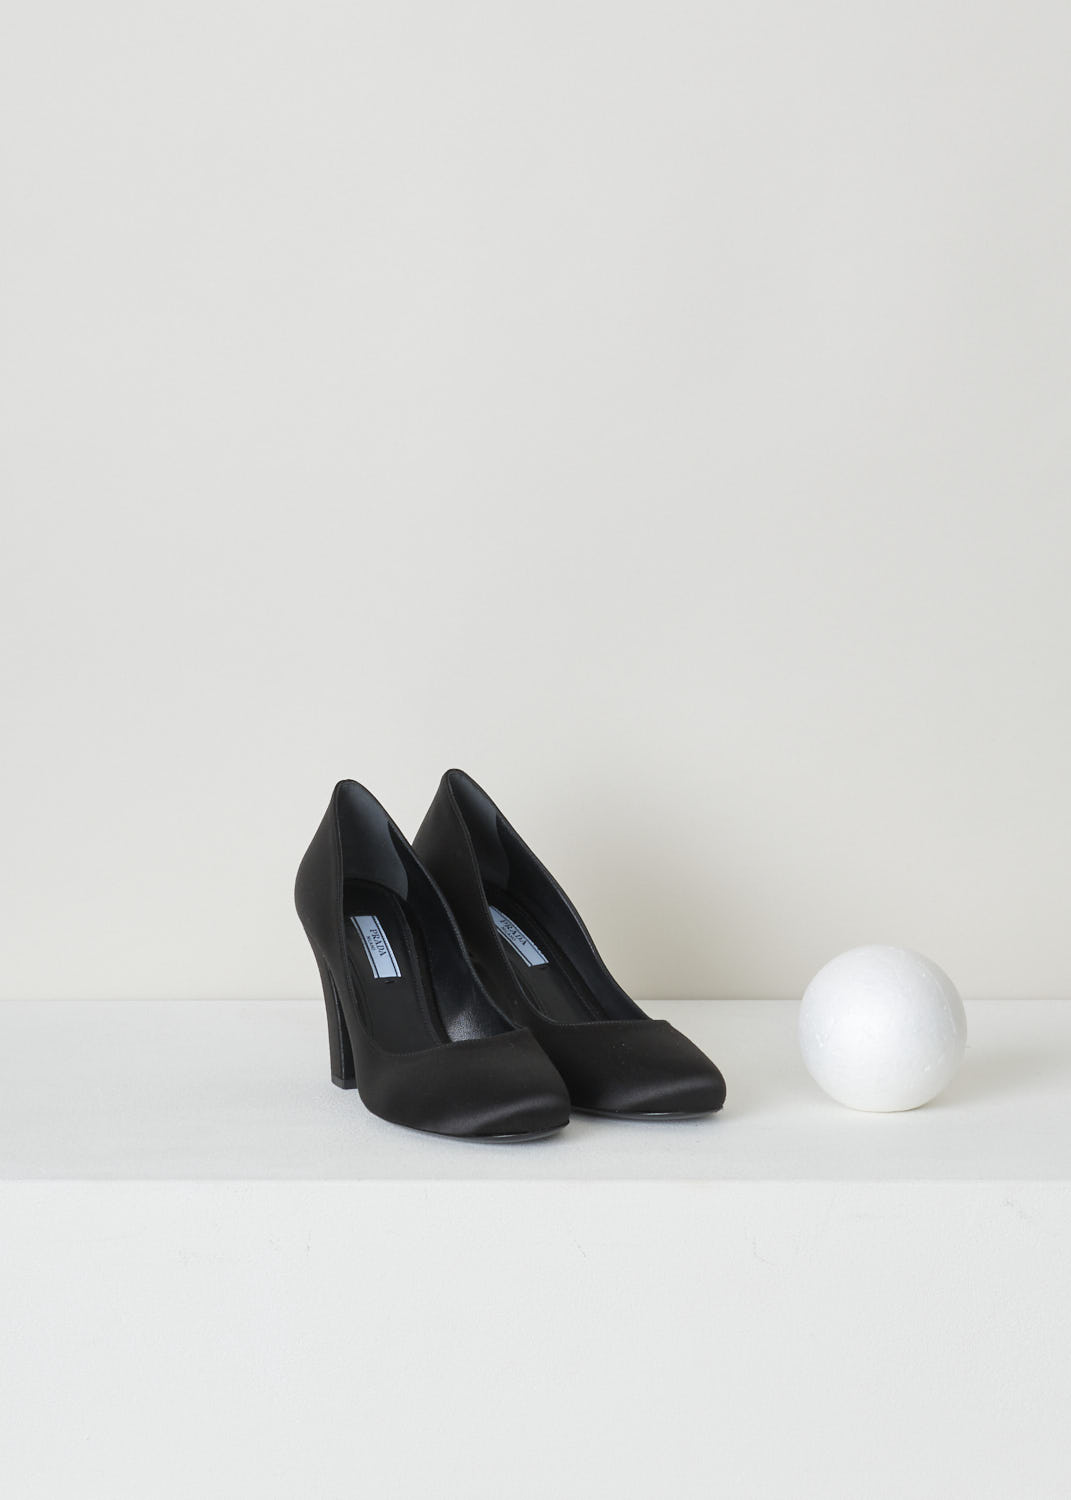 PRADA, BLACK SATIN PUMPS, 1I840L_RASO_F0002_NERO, Black, Front, Classic black pumps with a satin look. This model features a rounded toe box and a sturdy block heel.

Heel height: 8 cm / 3.14 inch.
